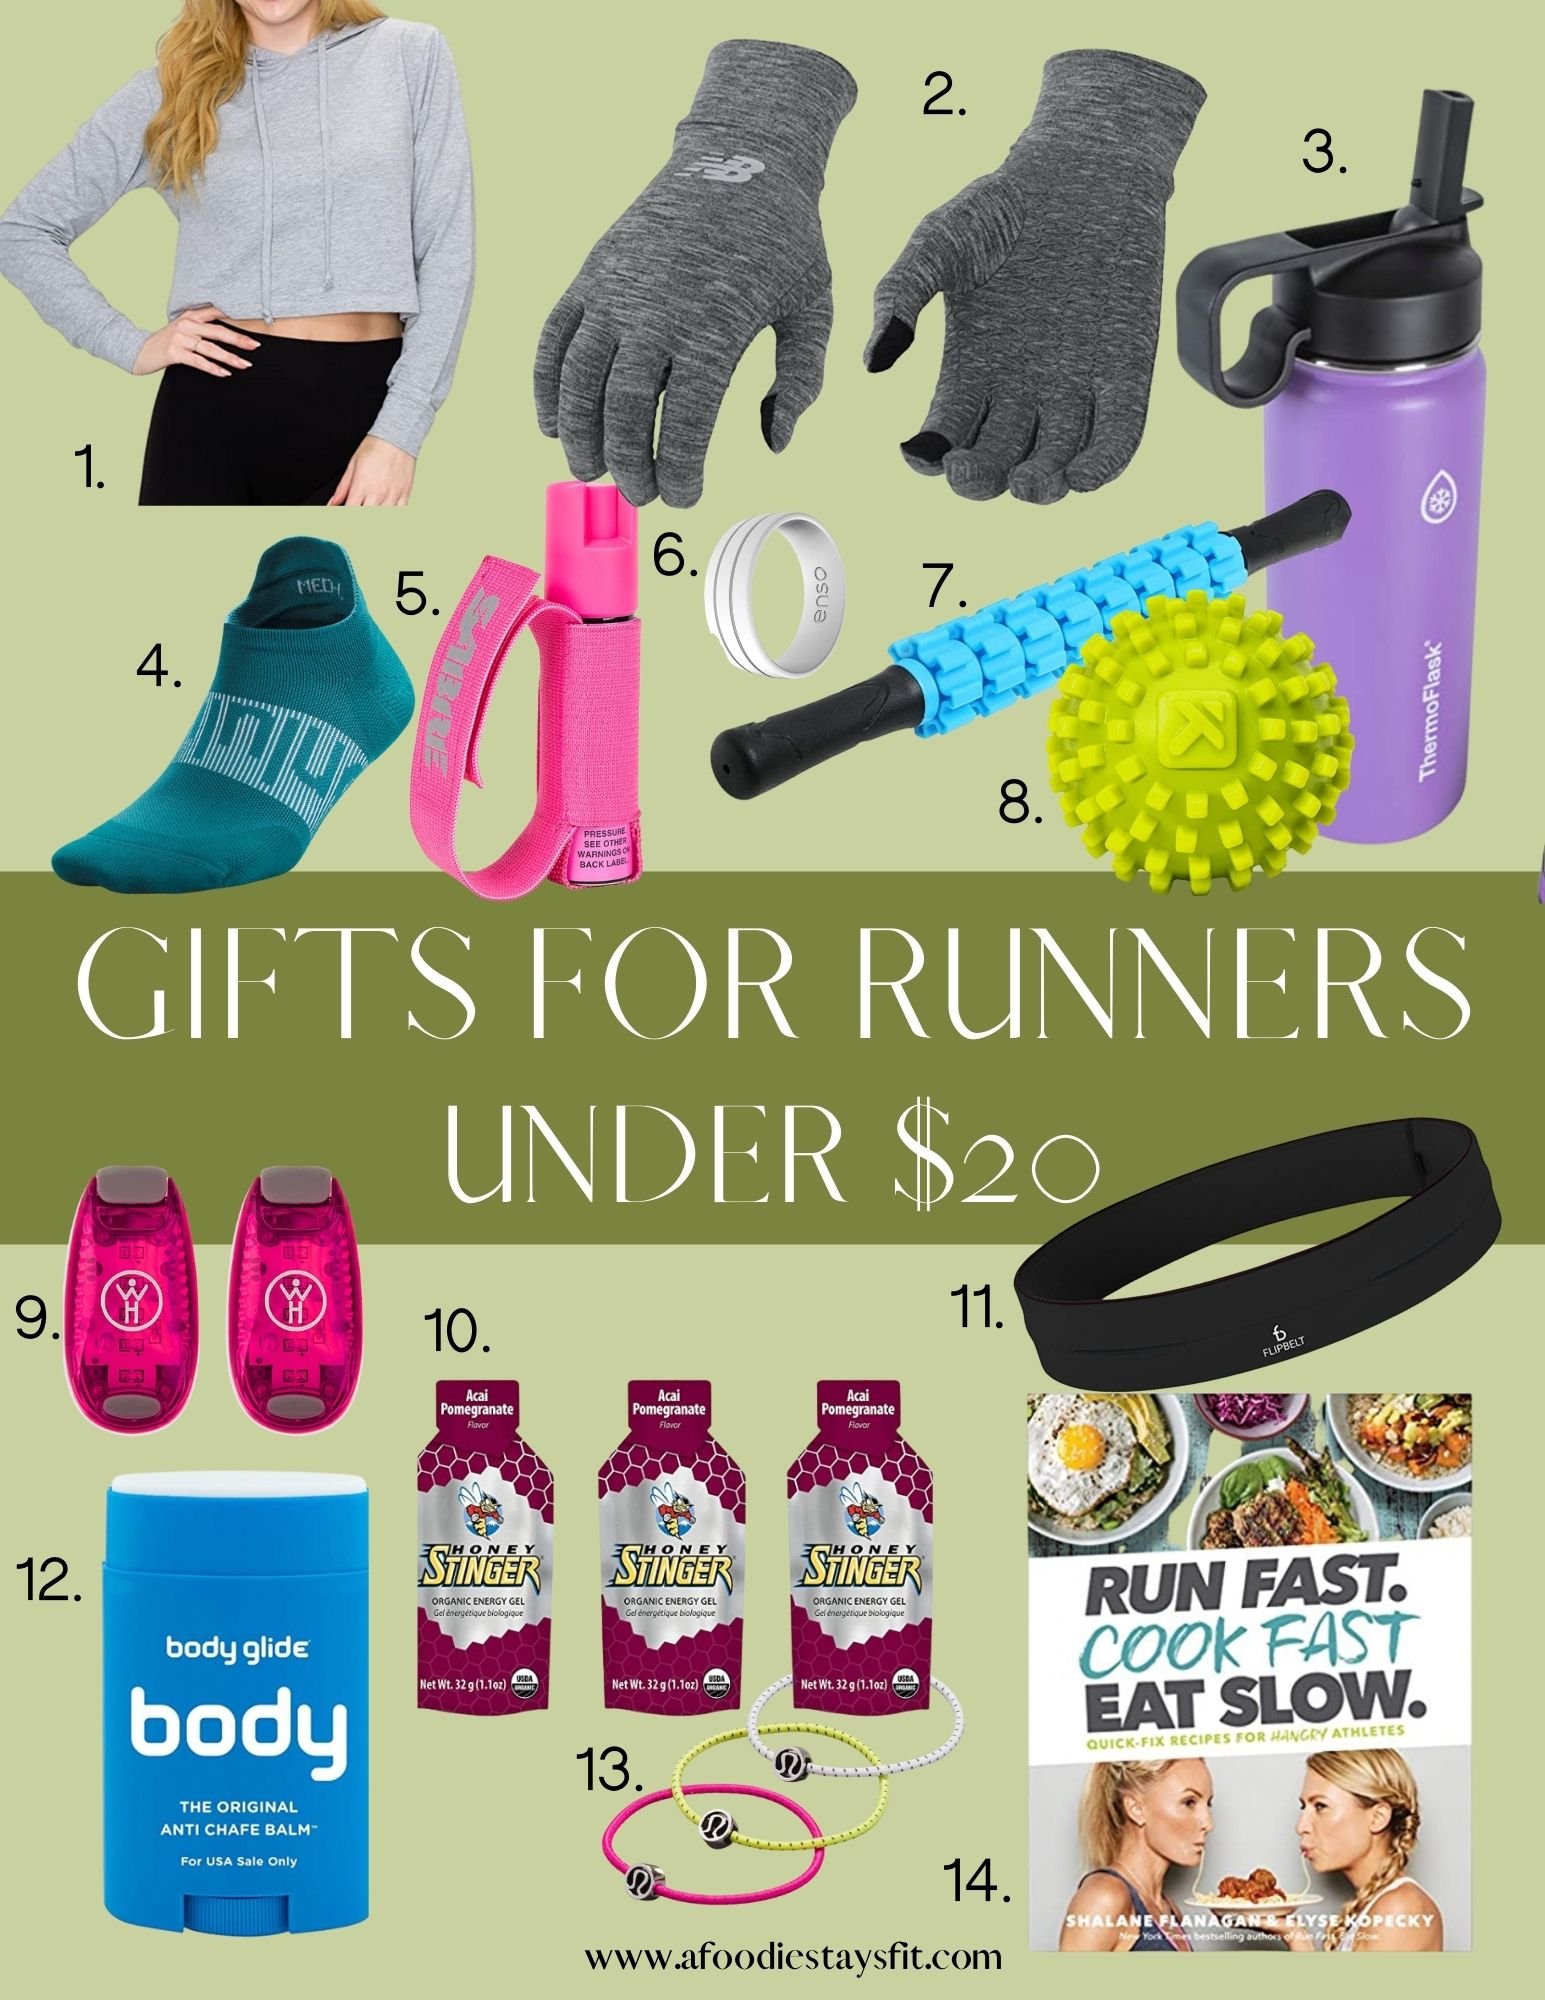 Gifts for Runners under $20 - 2022 Gift Guides